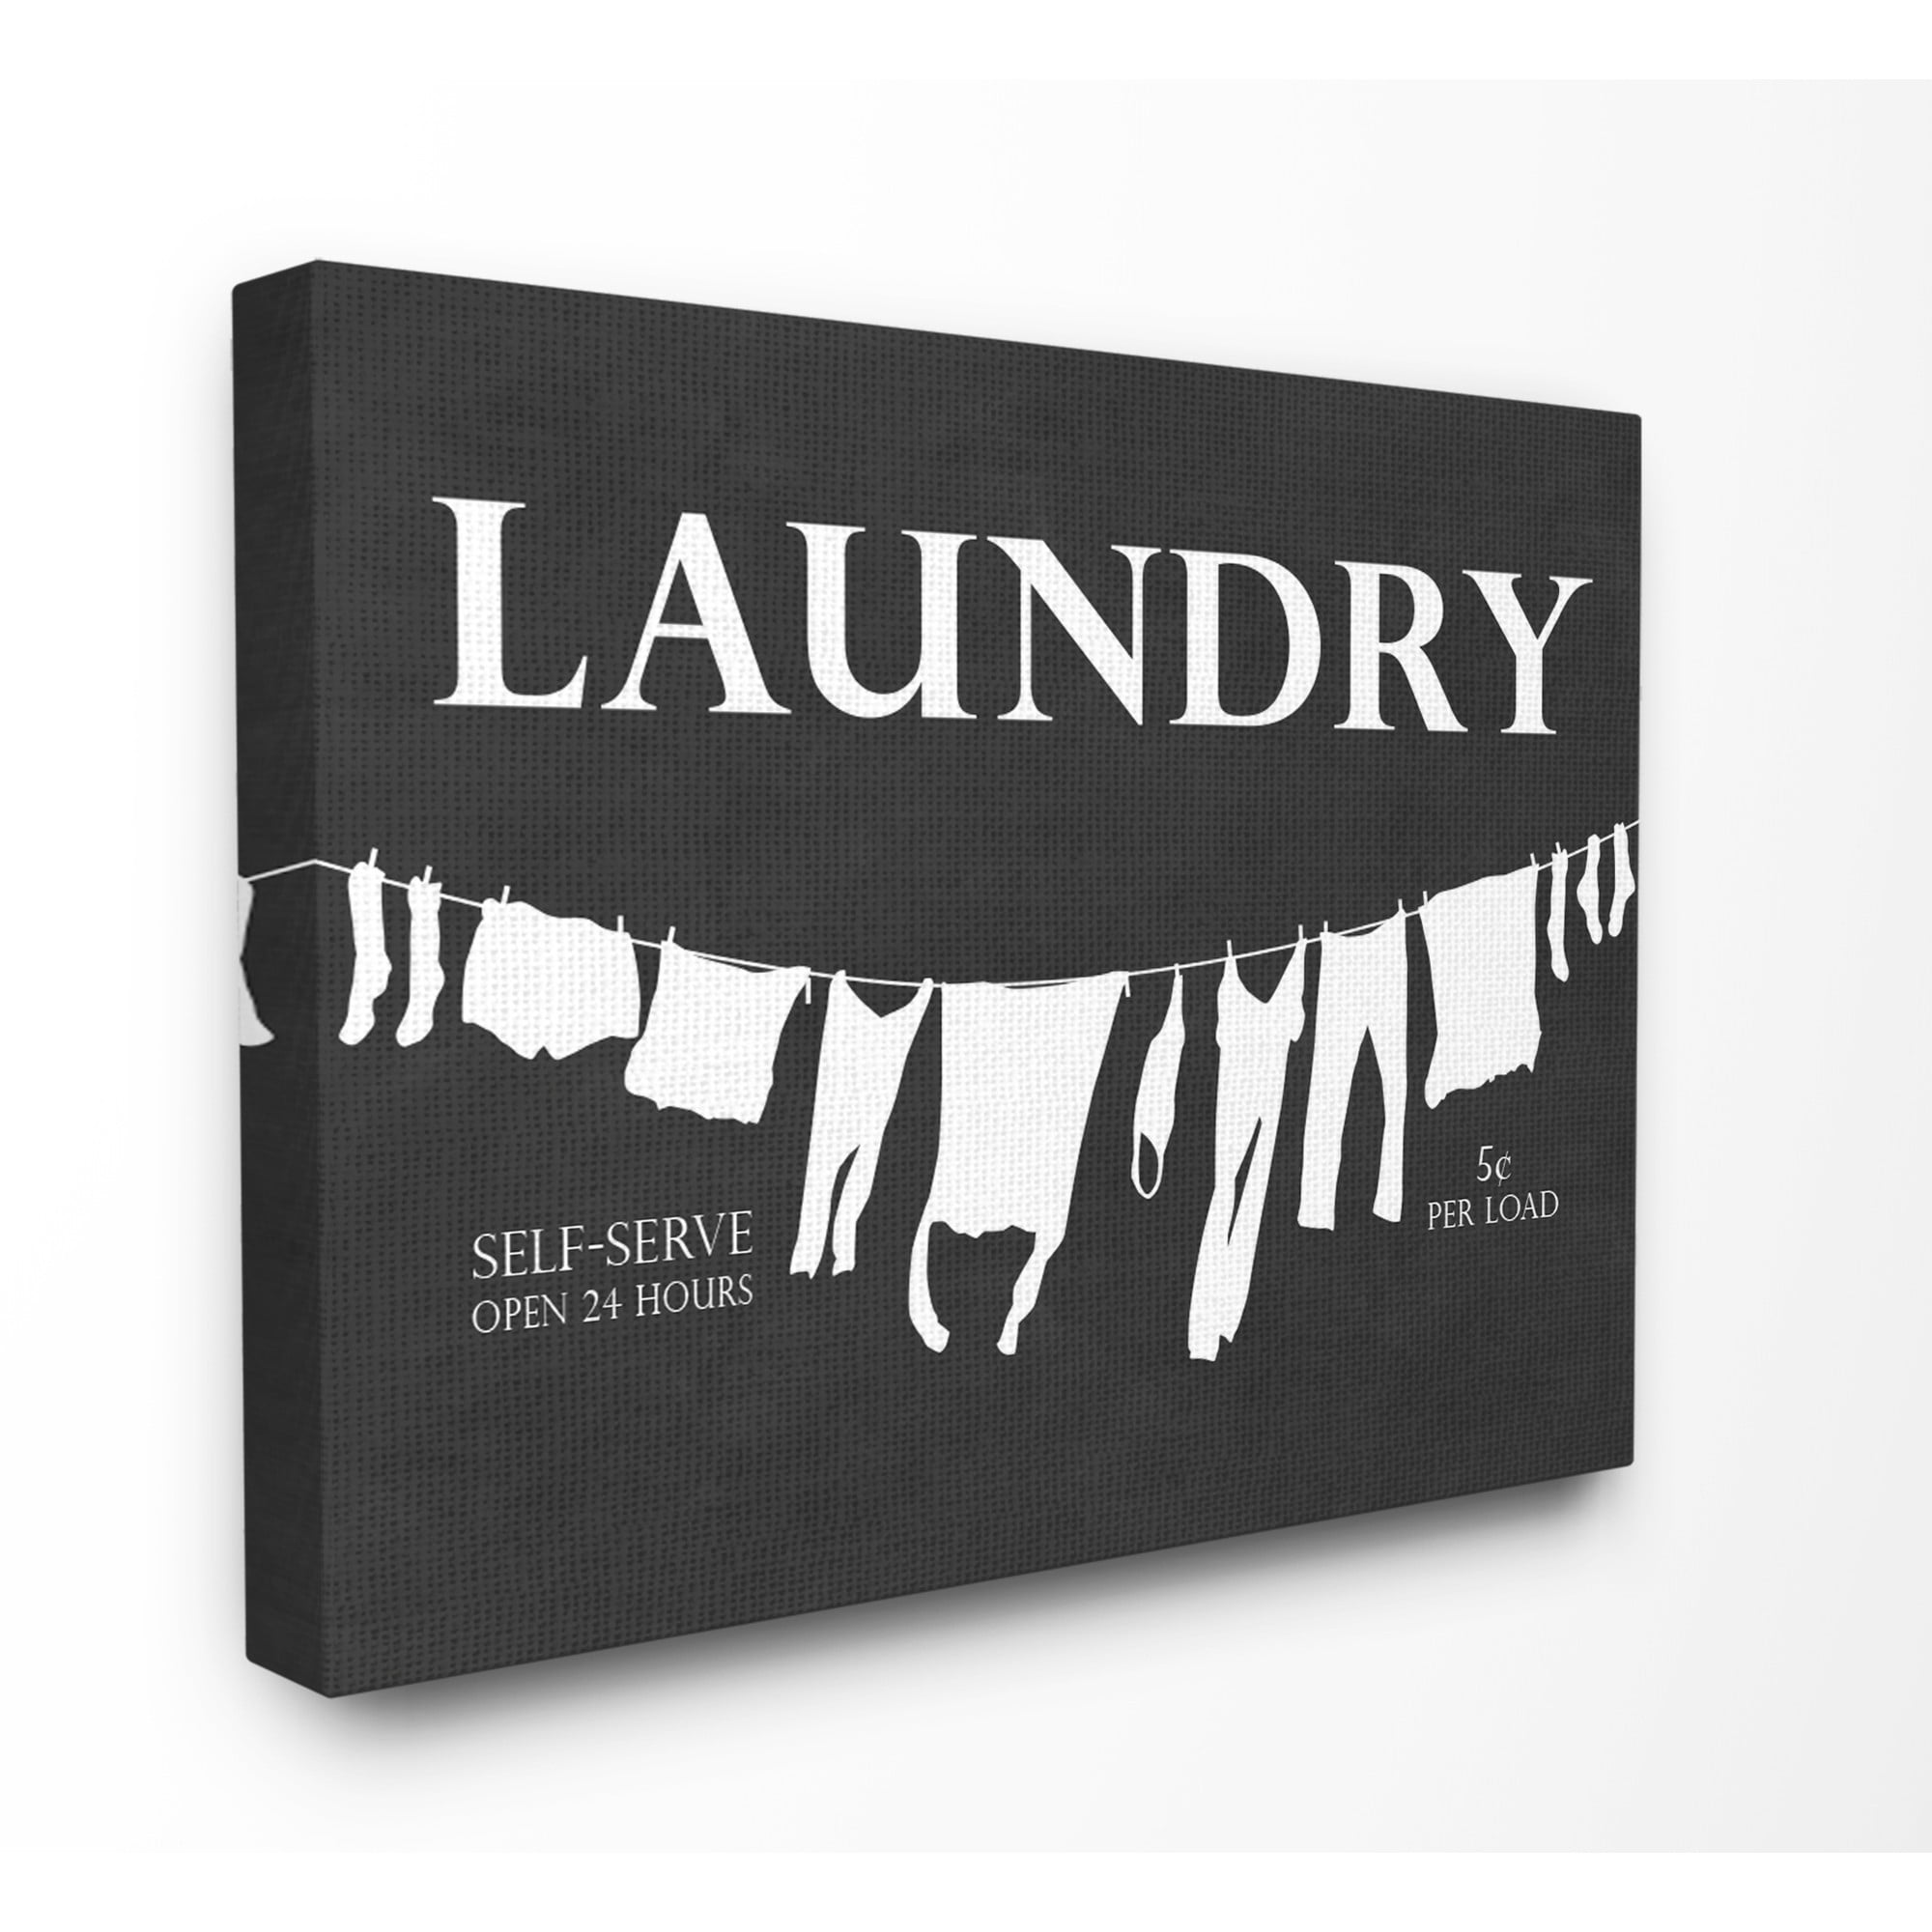 The Stupell Home Decor Collection Laundry Clothesline Advert Oversized ...